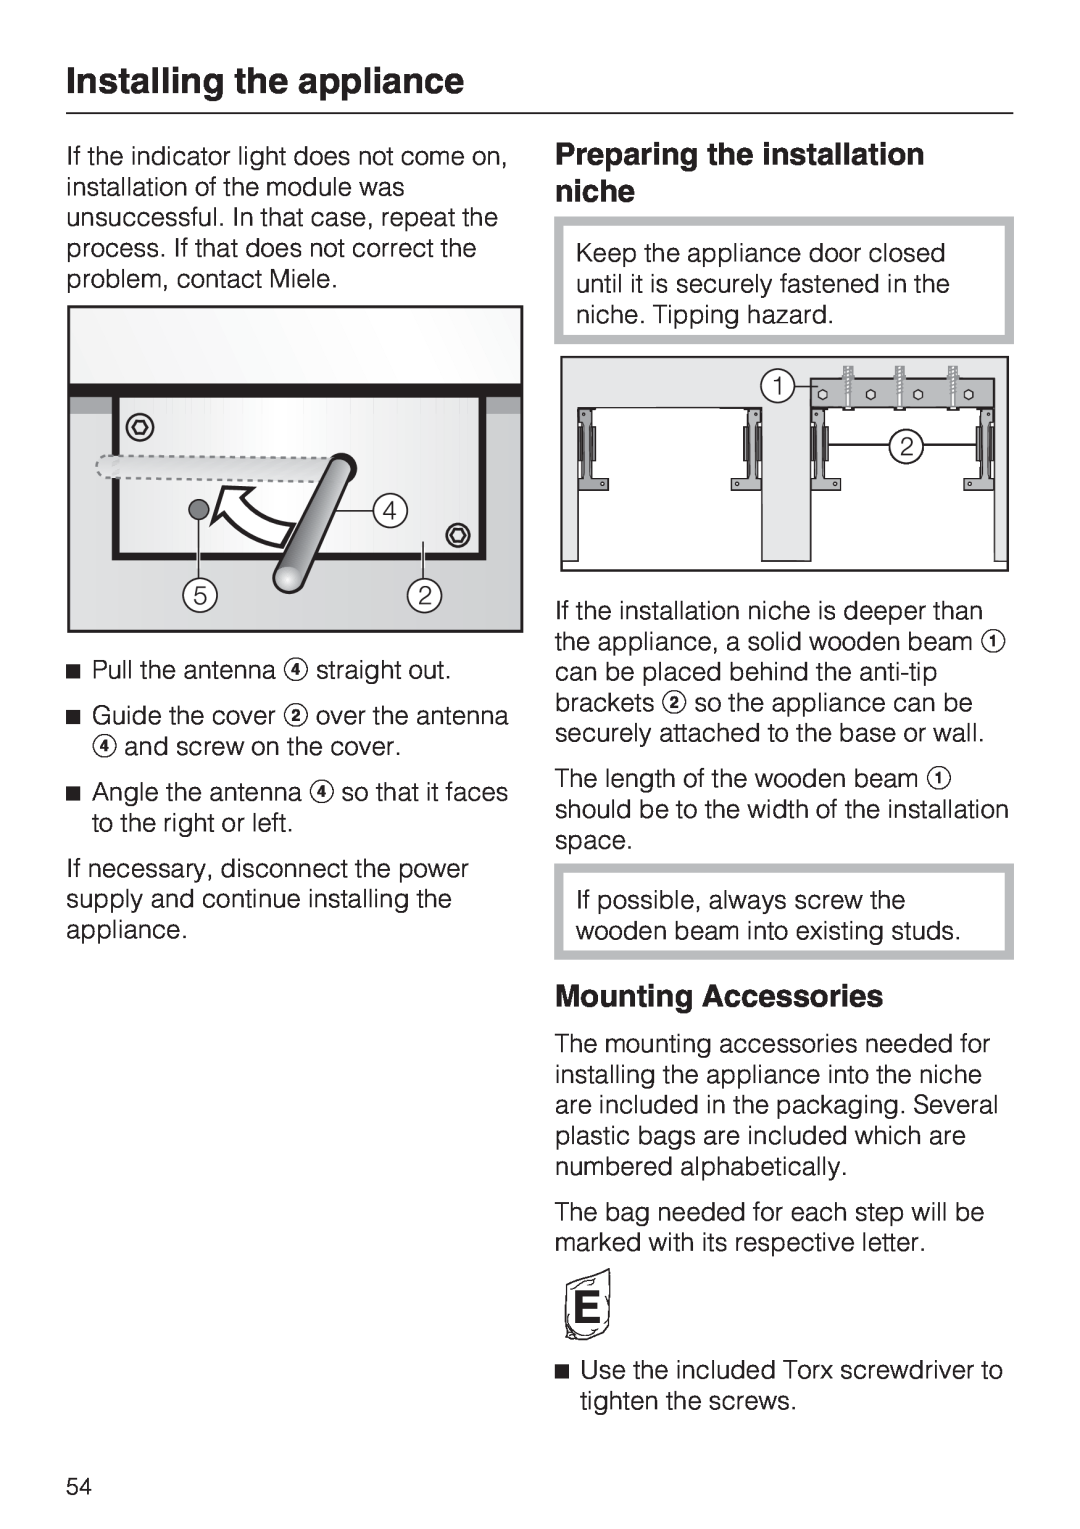 Miele F1411SF installation instructions Preparing the installation niche, Mounting Accessories, Installing the appliance 